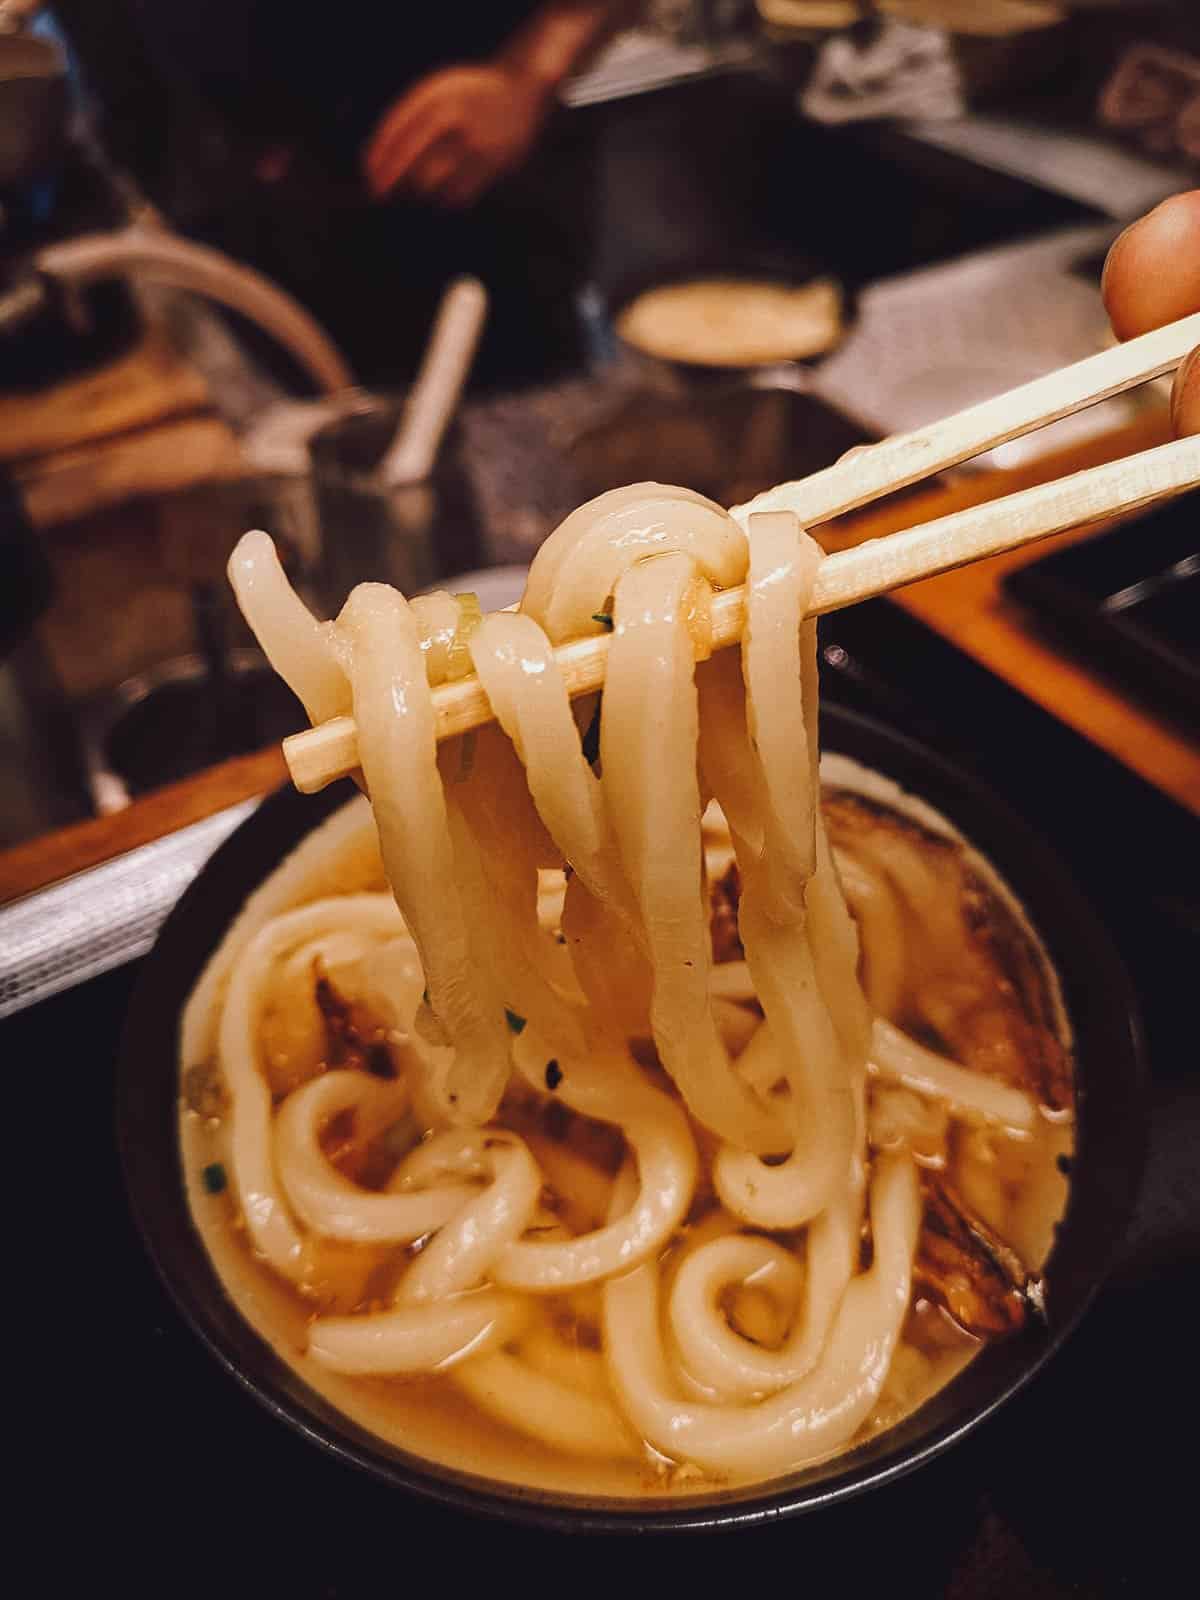 Showing off the udon noodles at Ibuki